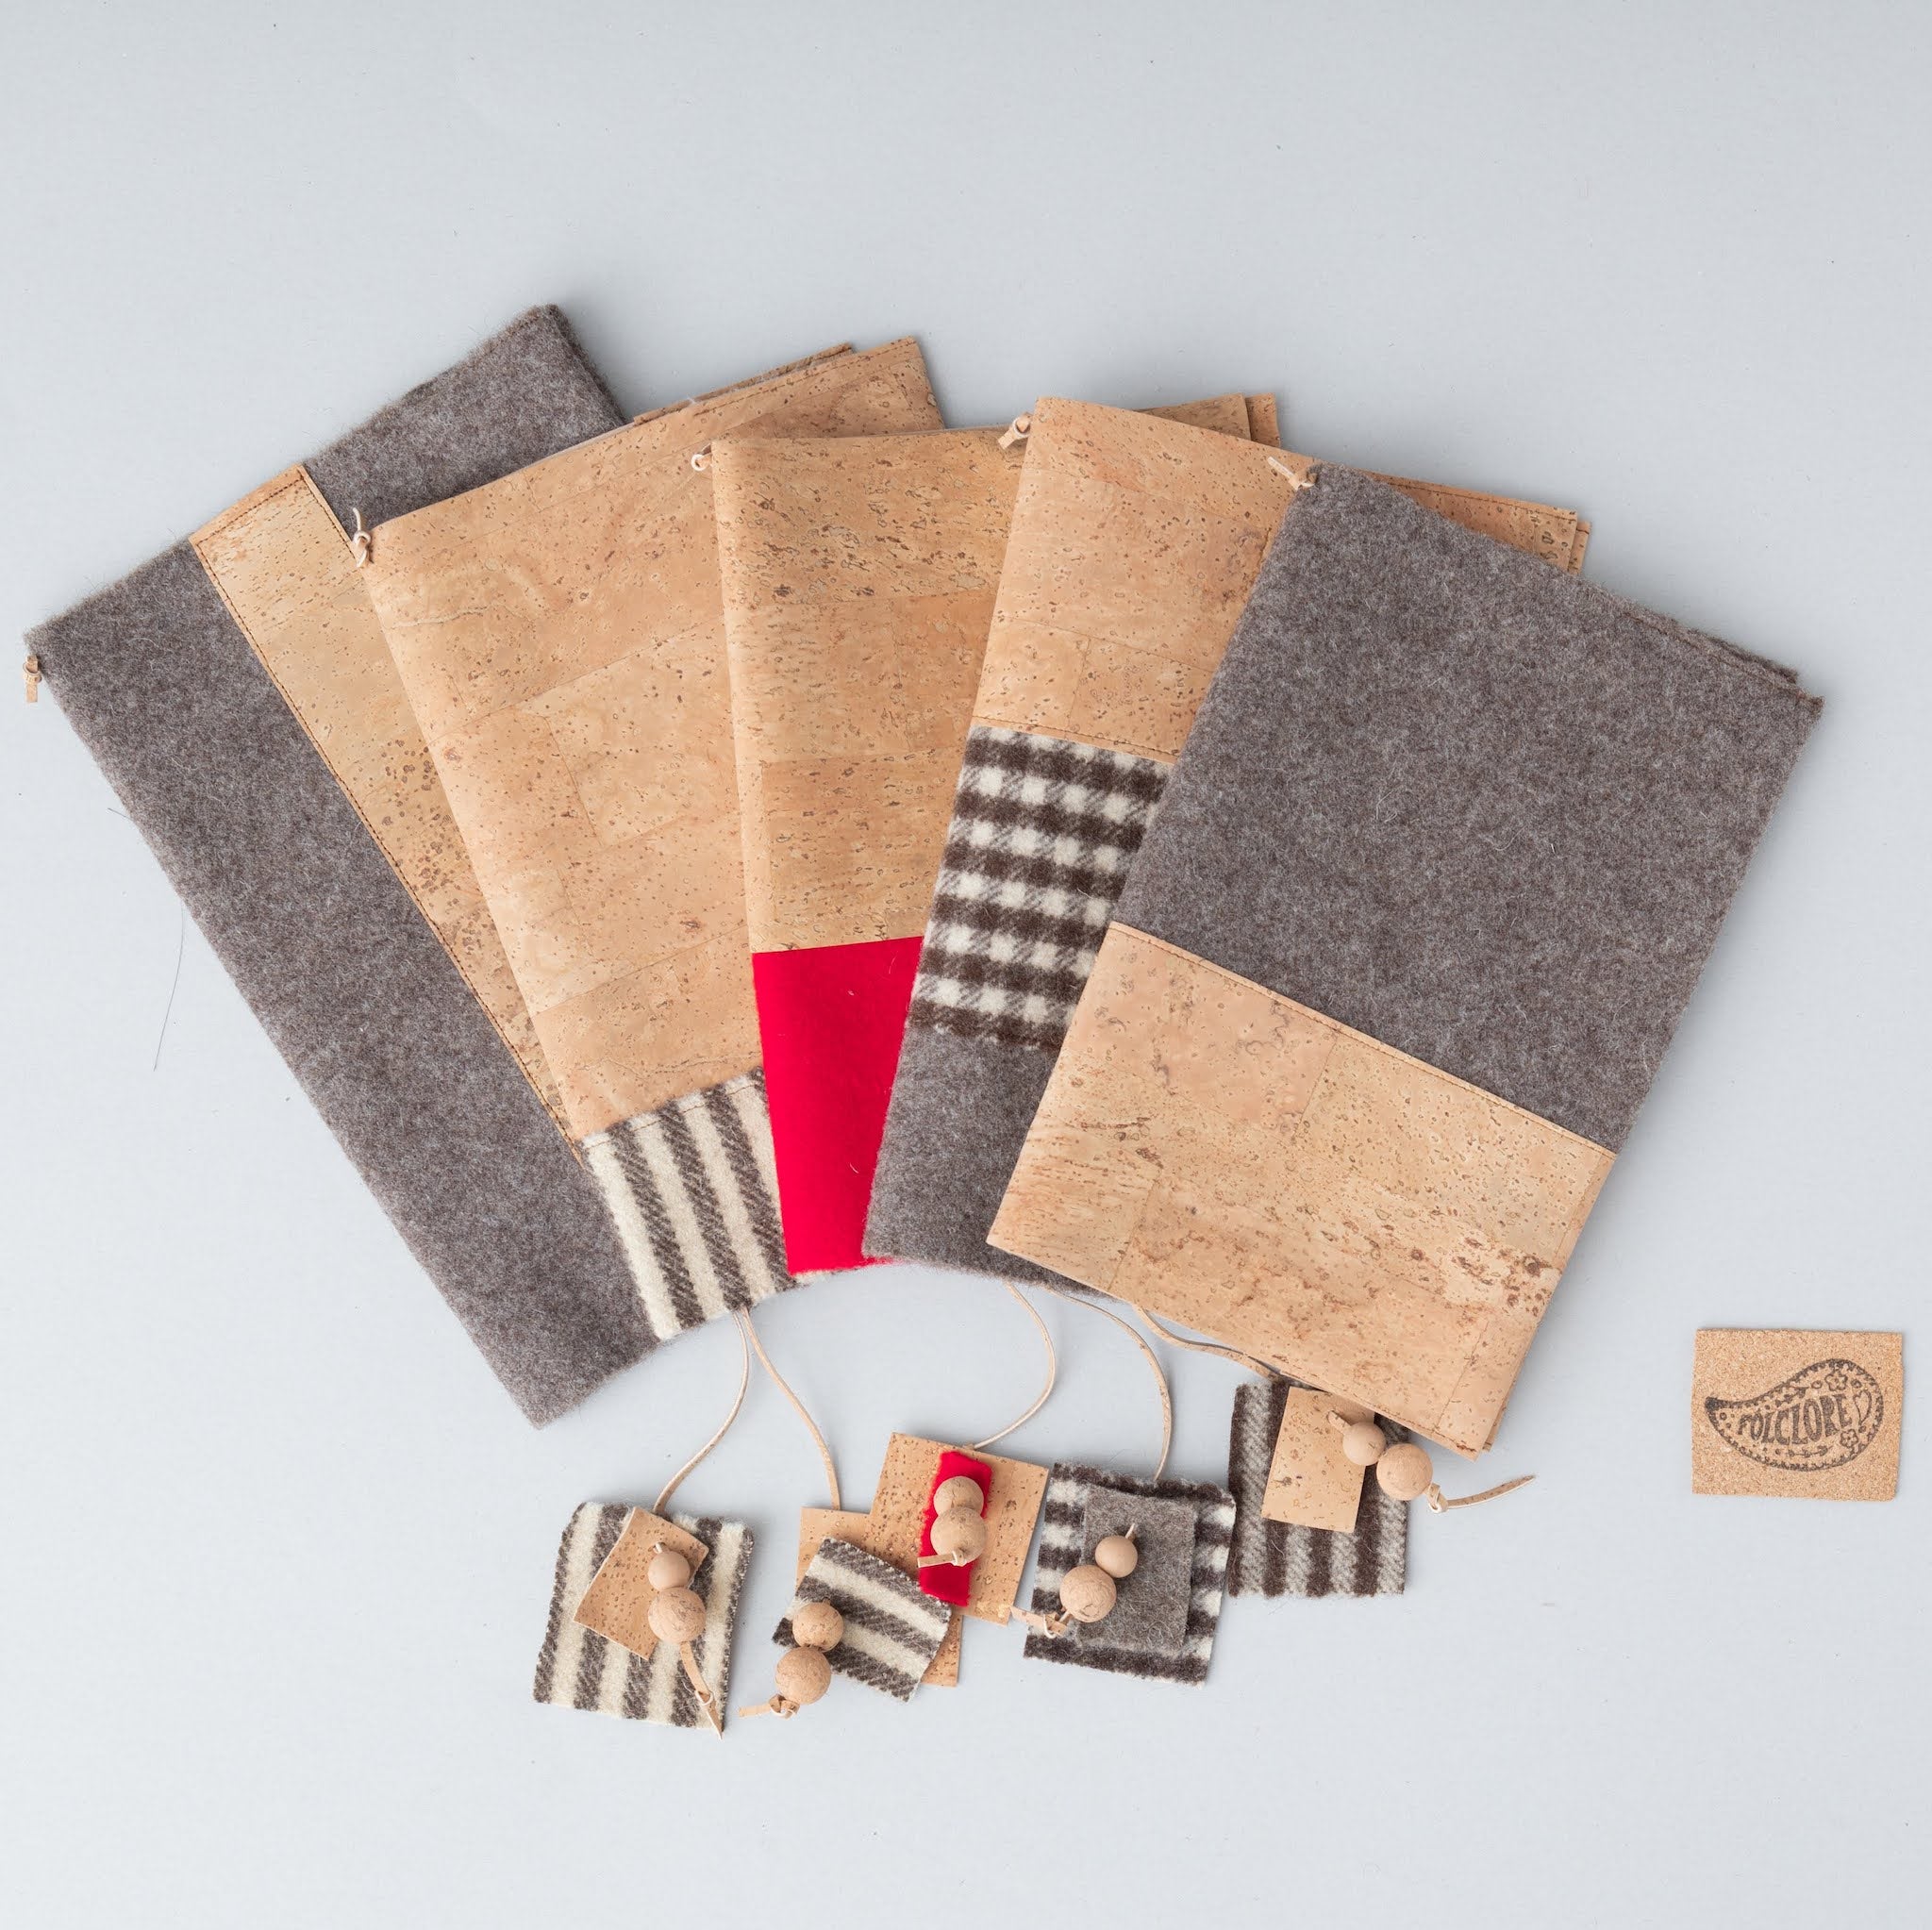 folclorecradfts wool and cork book covers' options 